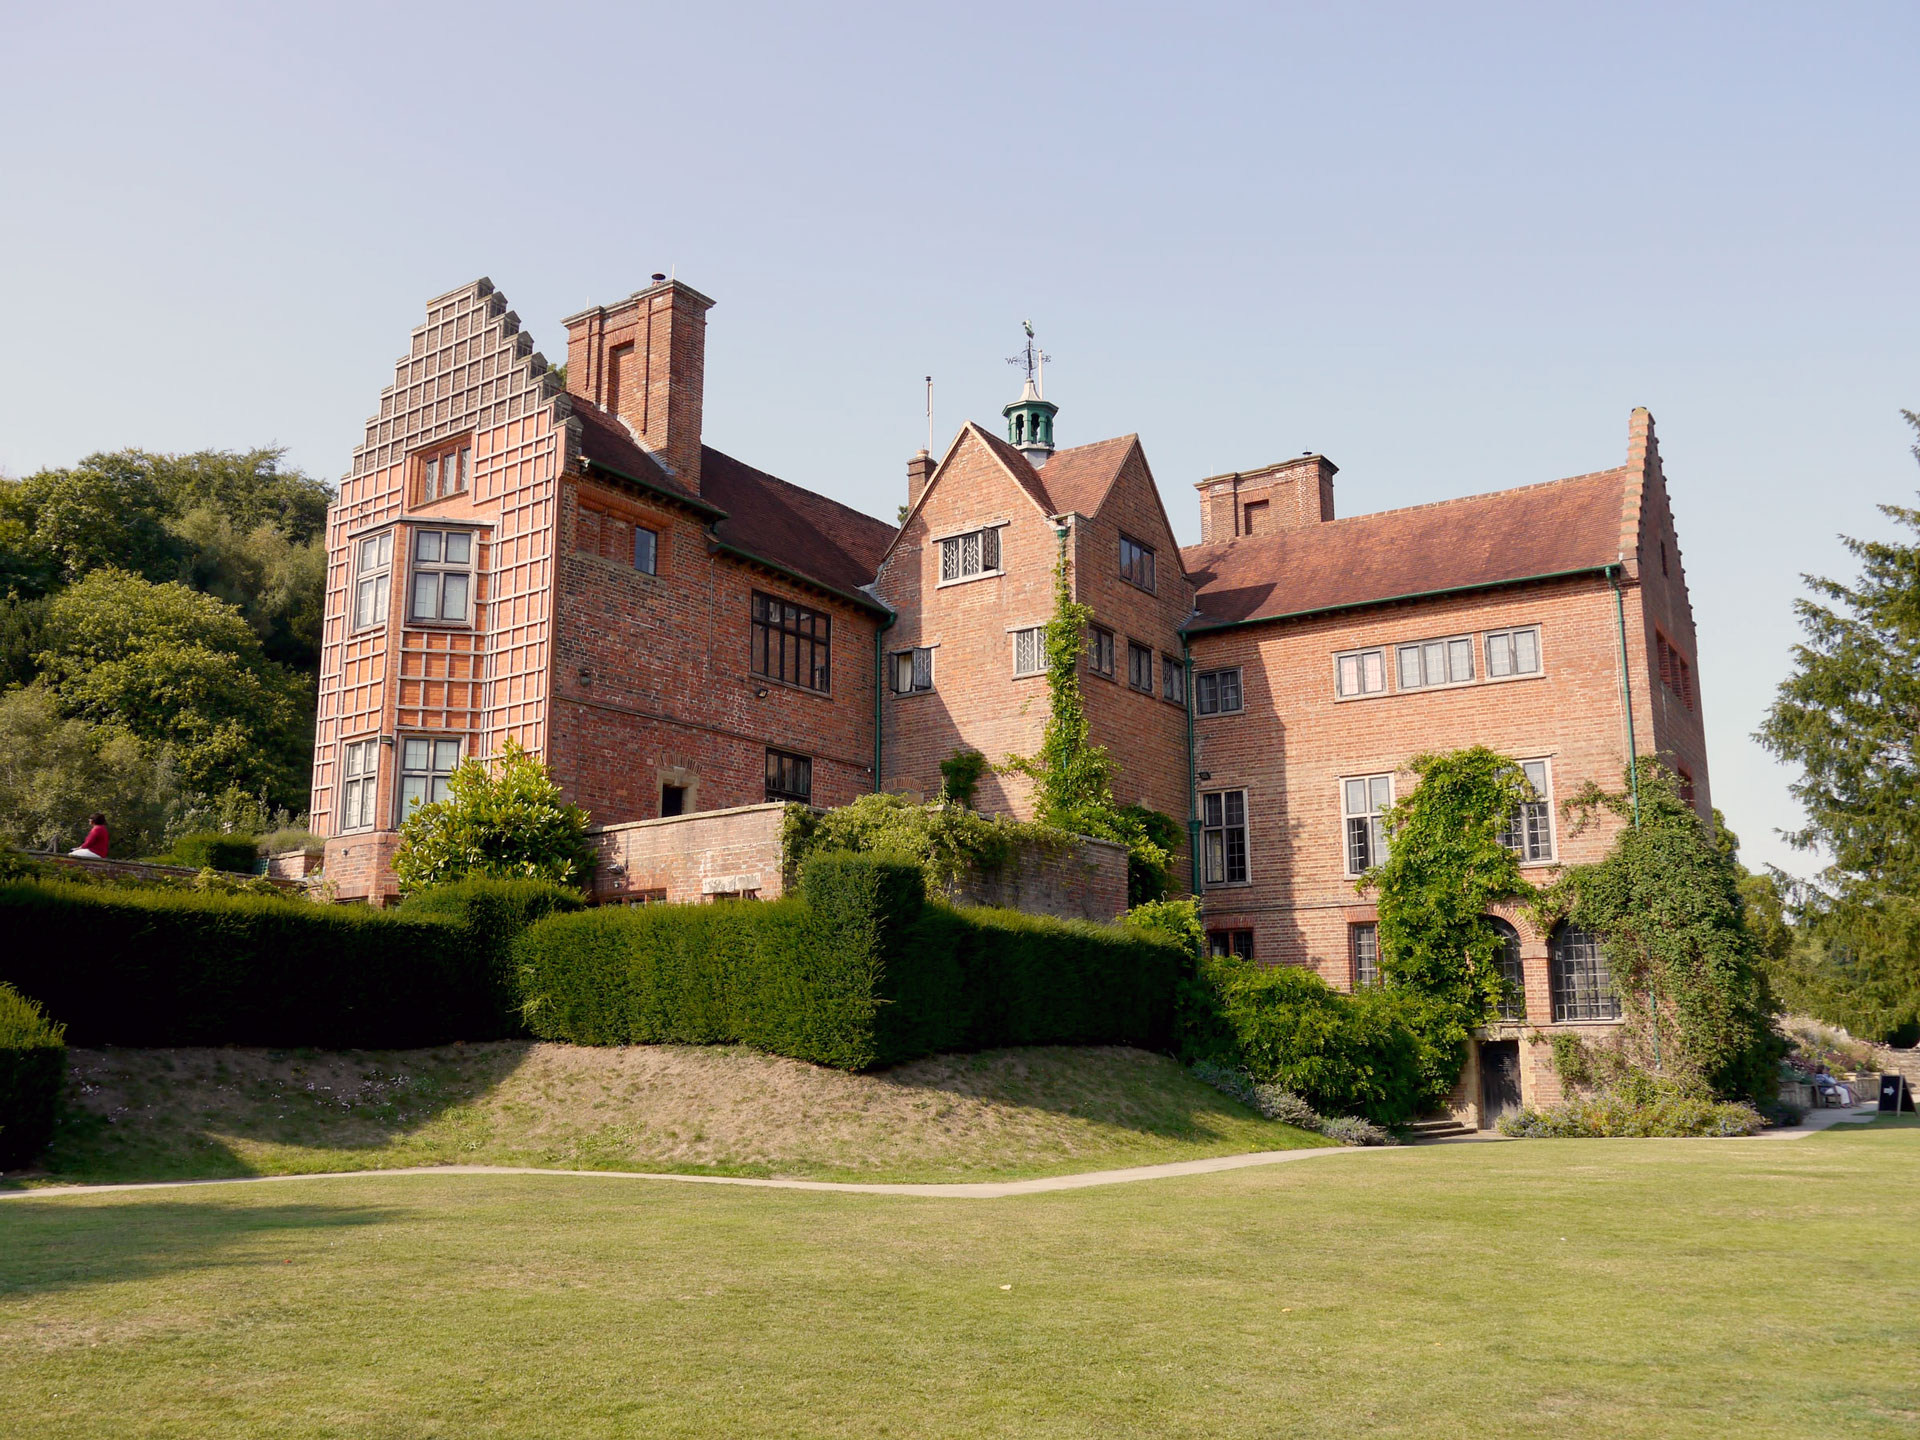 Chartwell house and garden